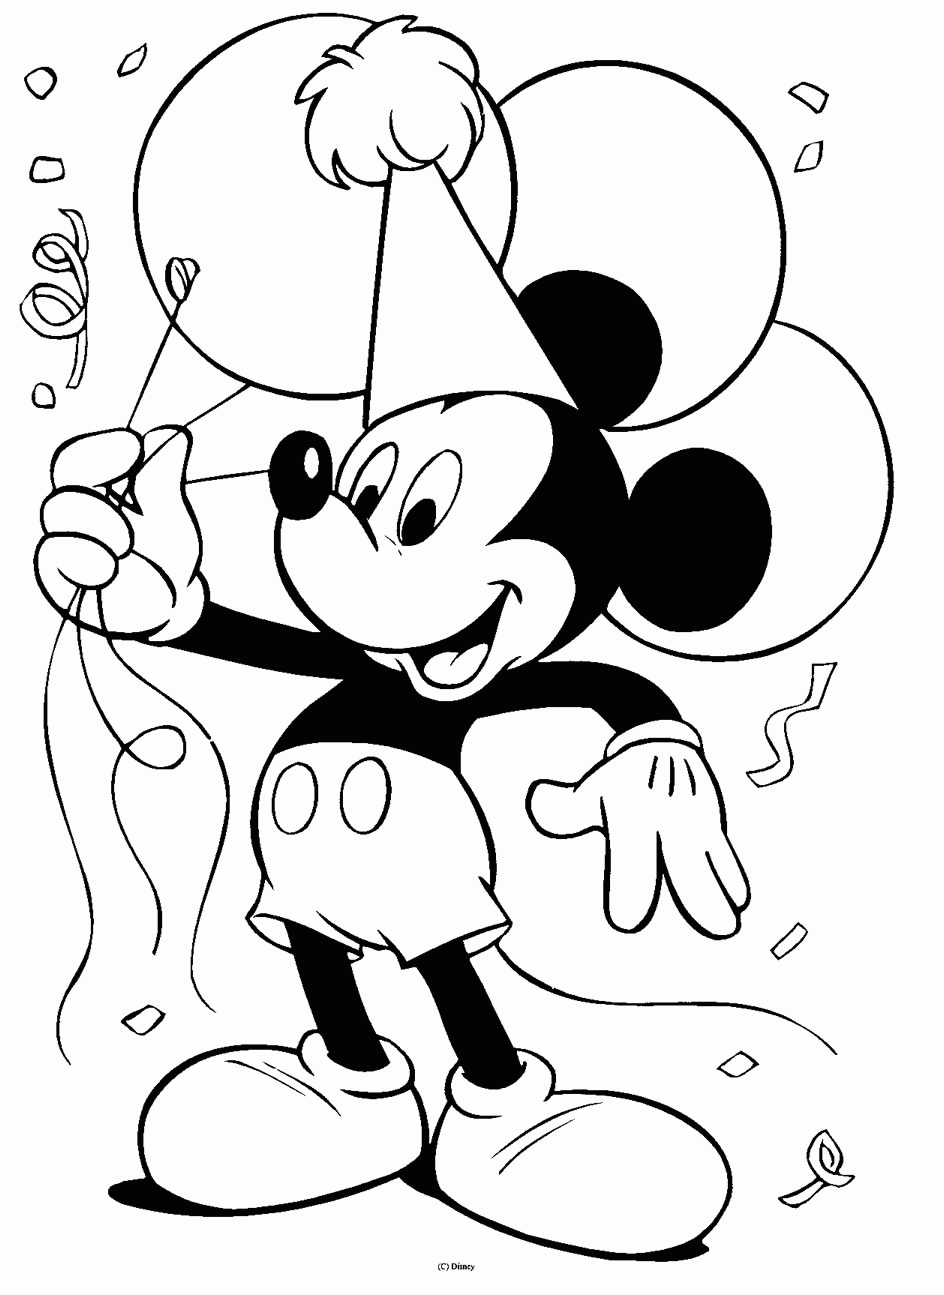 Mickey Mouse FREE Disney coloring pages